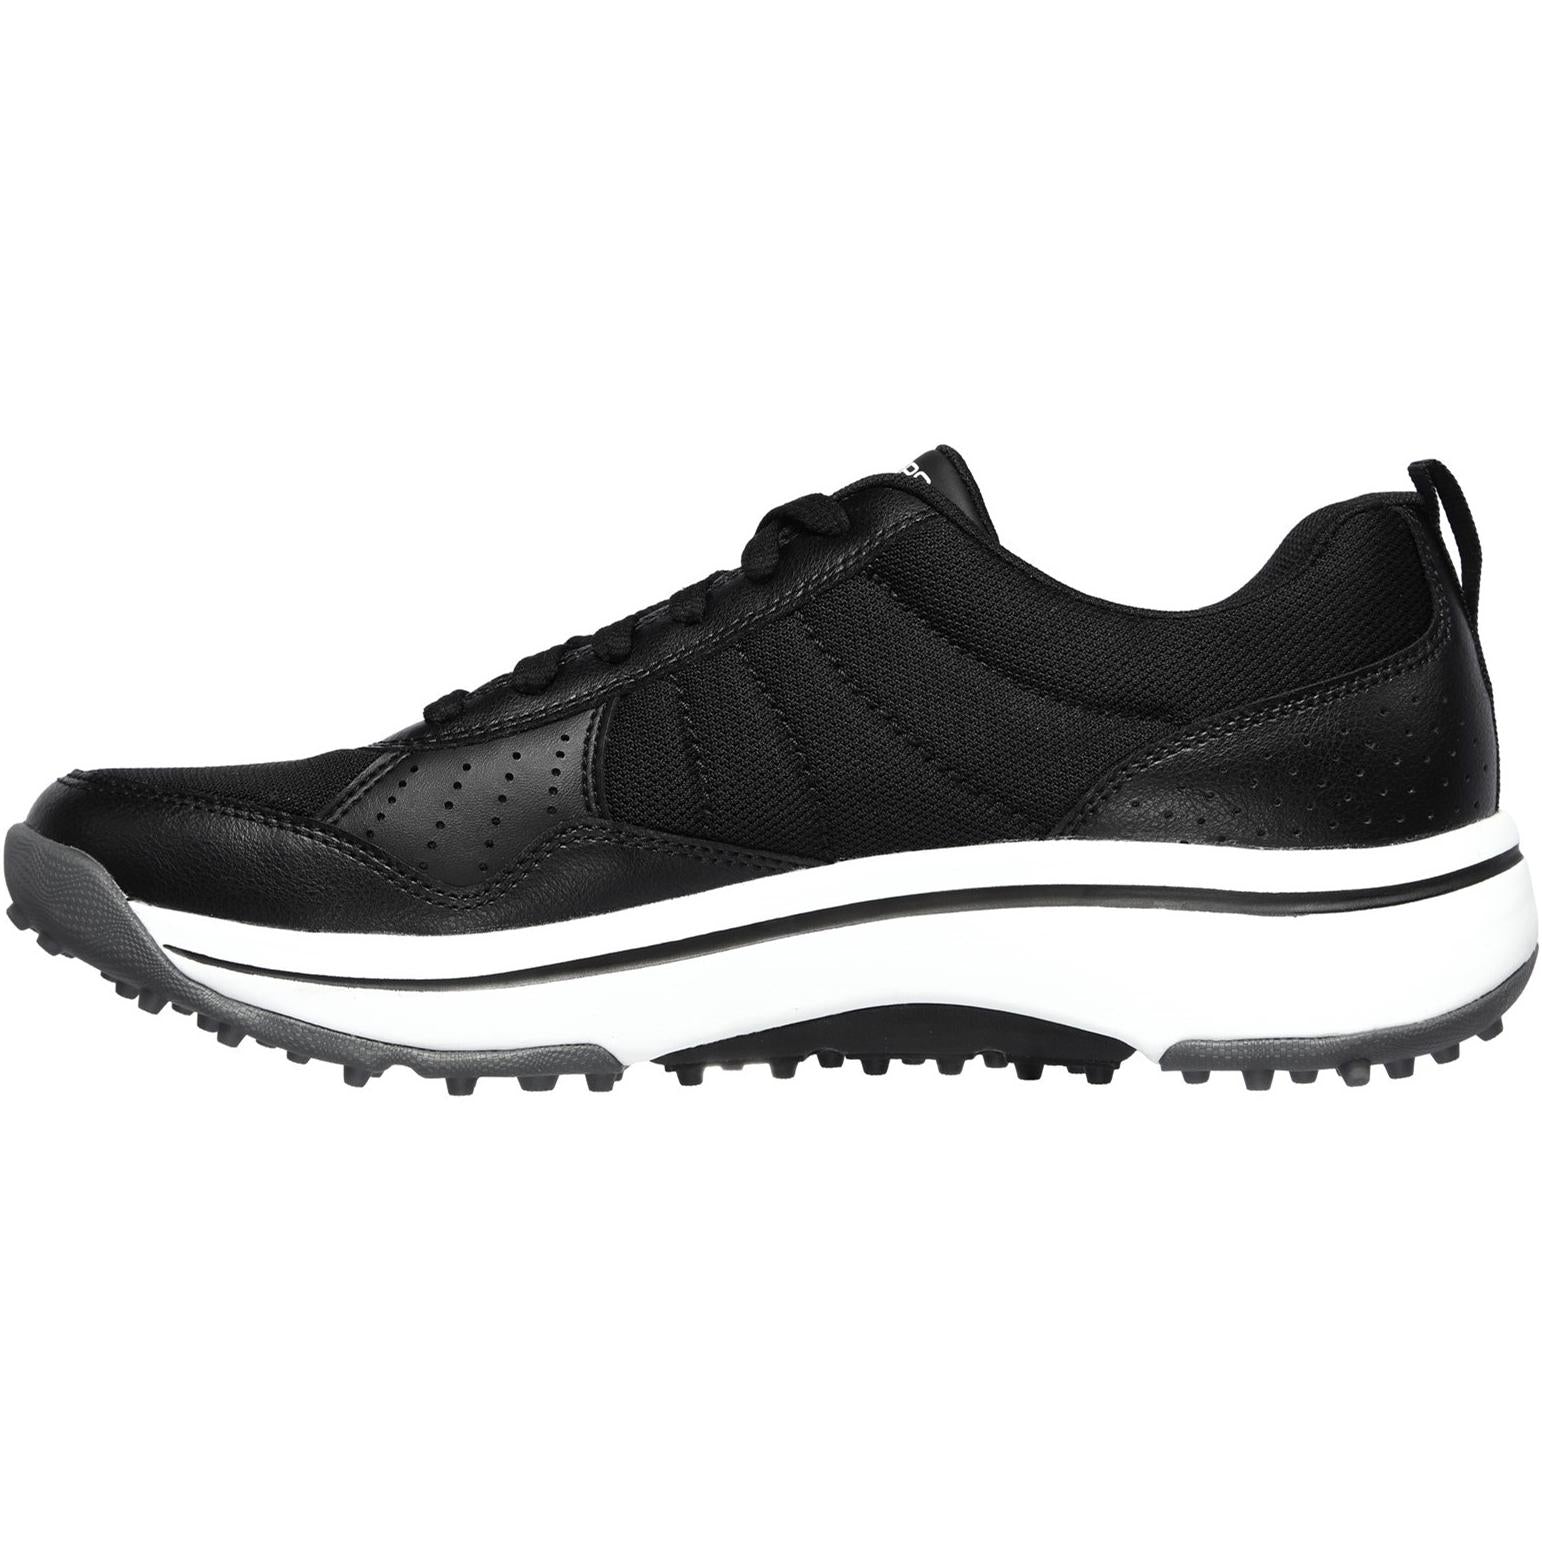 Skechers Go Golf Arch Fit Line Up Sport Shoes